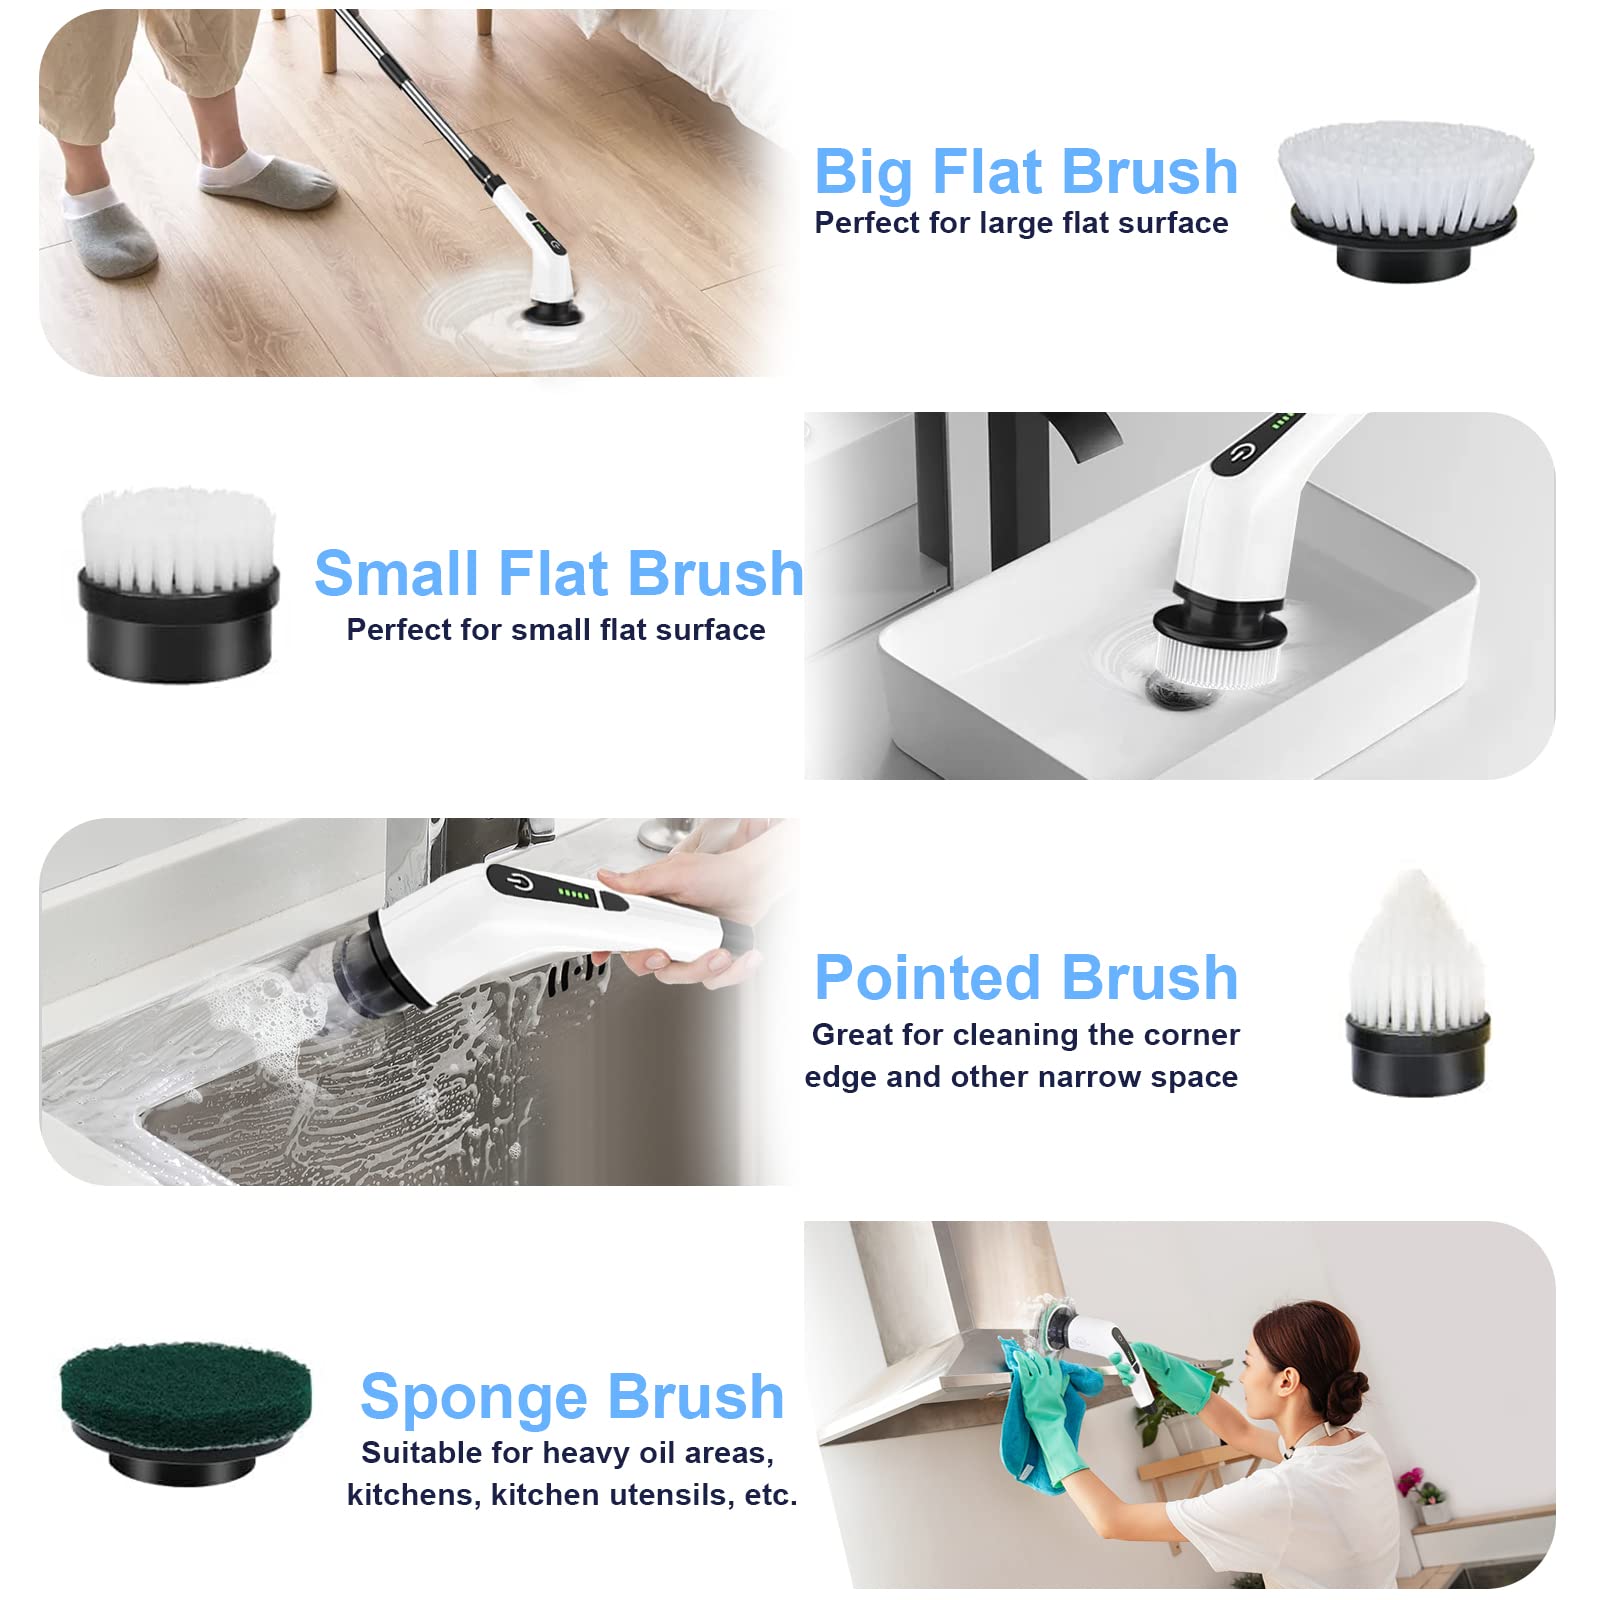 Electric Spin Scrubber, LOSUY Cordless Cleaning Brush with 7 Replaceable Drill Brush Heads and 54 Inch Adjustable Extension Arm, Power Shower Scrubber for Bathroom, Kitchen, Floor, Tile, Tub